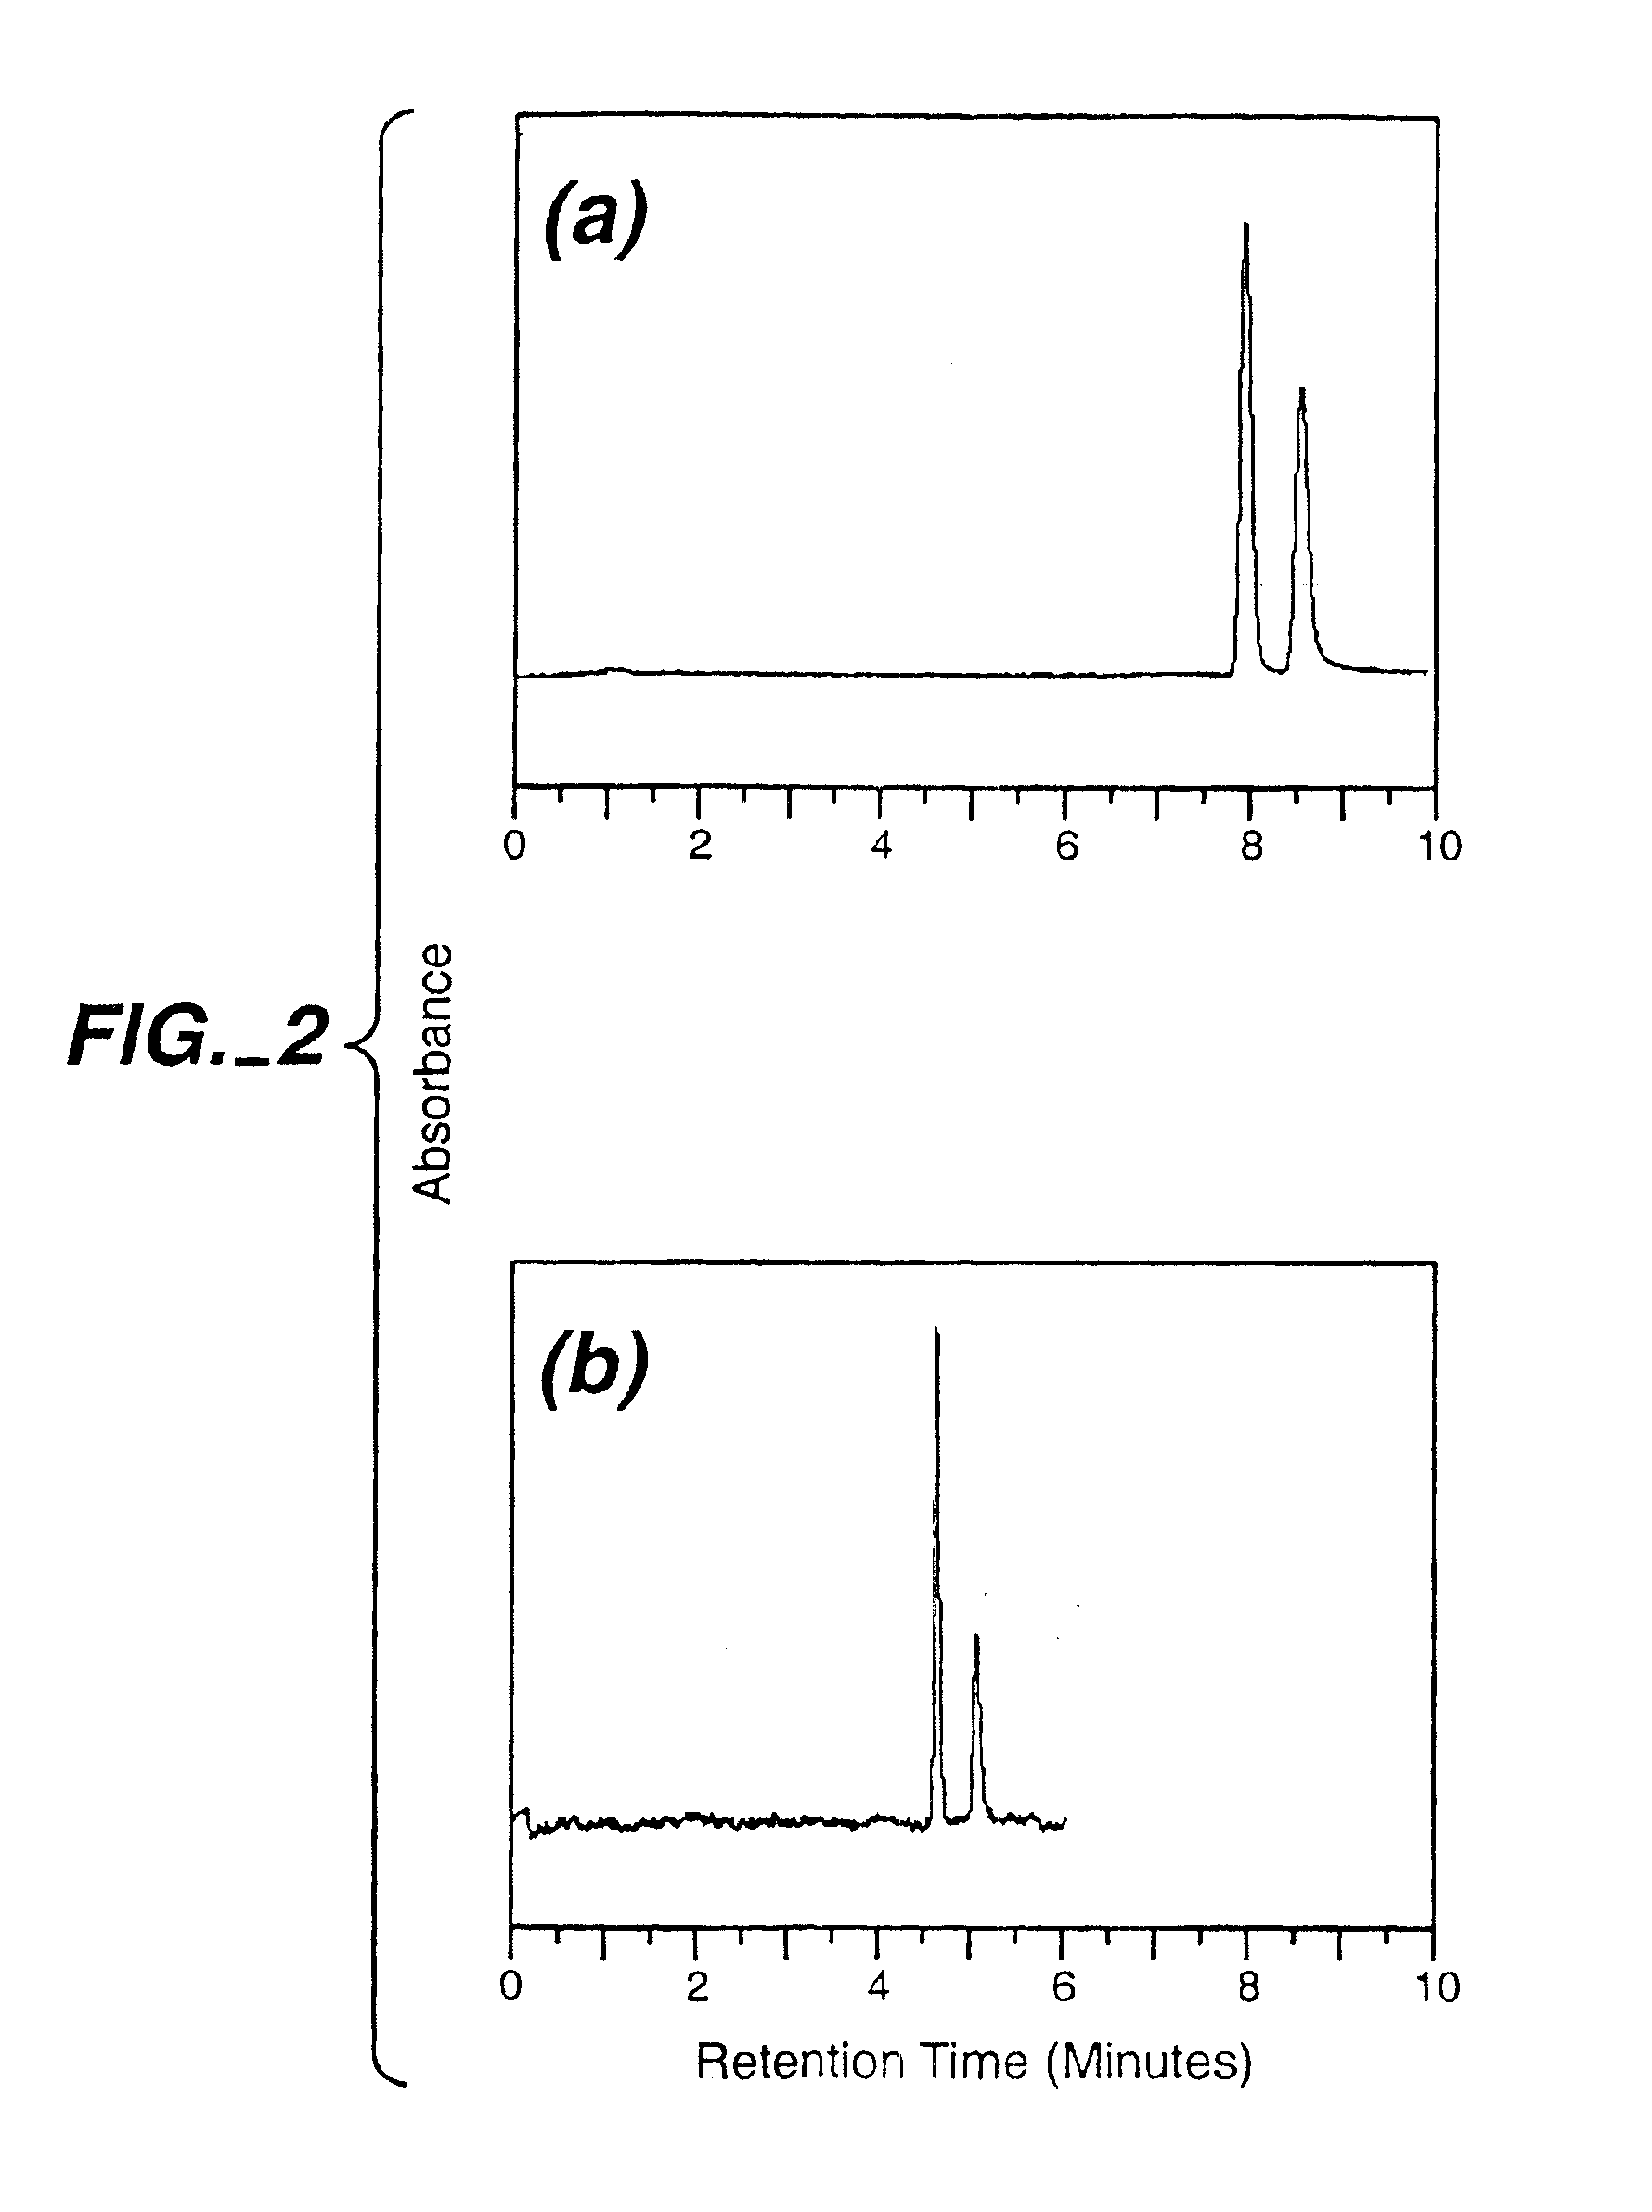 Fused-silica capillaries with photopolymer components